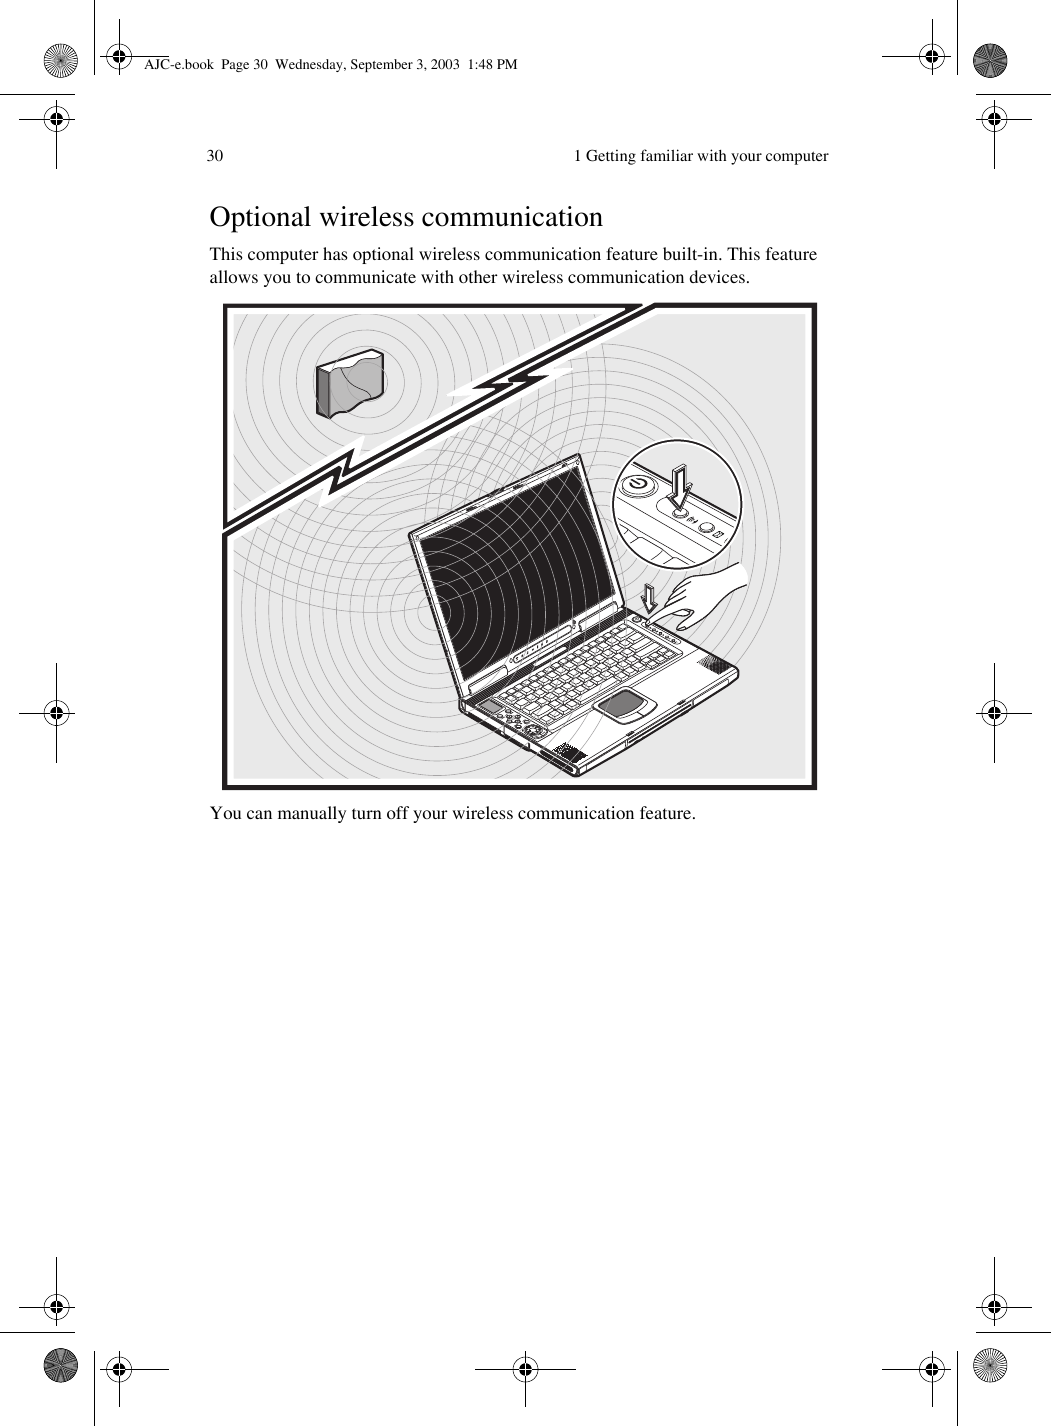  1 Getting familiar with your computer30Optional wireless communicationThis computer has optional wireless communication feature built-in. This feature allows you to communicate with other wireless communication devices.You can manually turn off your wireless communication feature. AJC-e.book  Page 30  Wednesday, September 3, 2003  1:48 PM